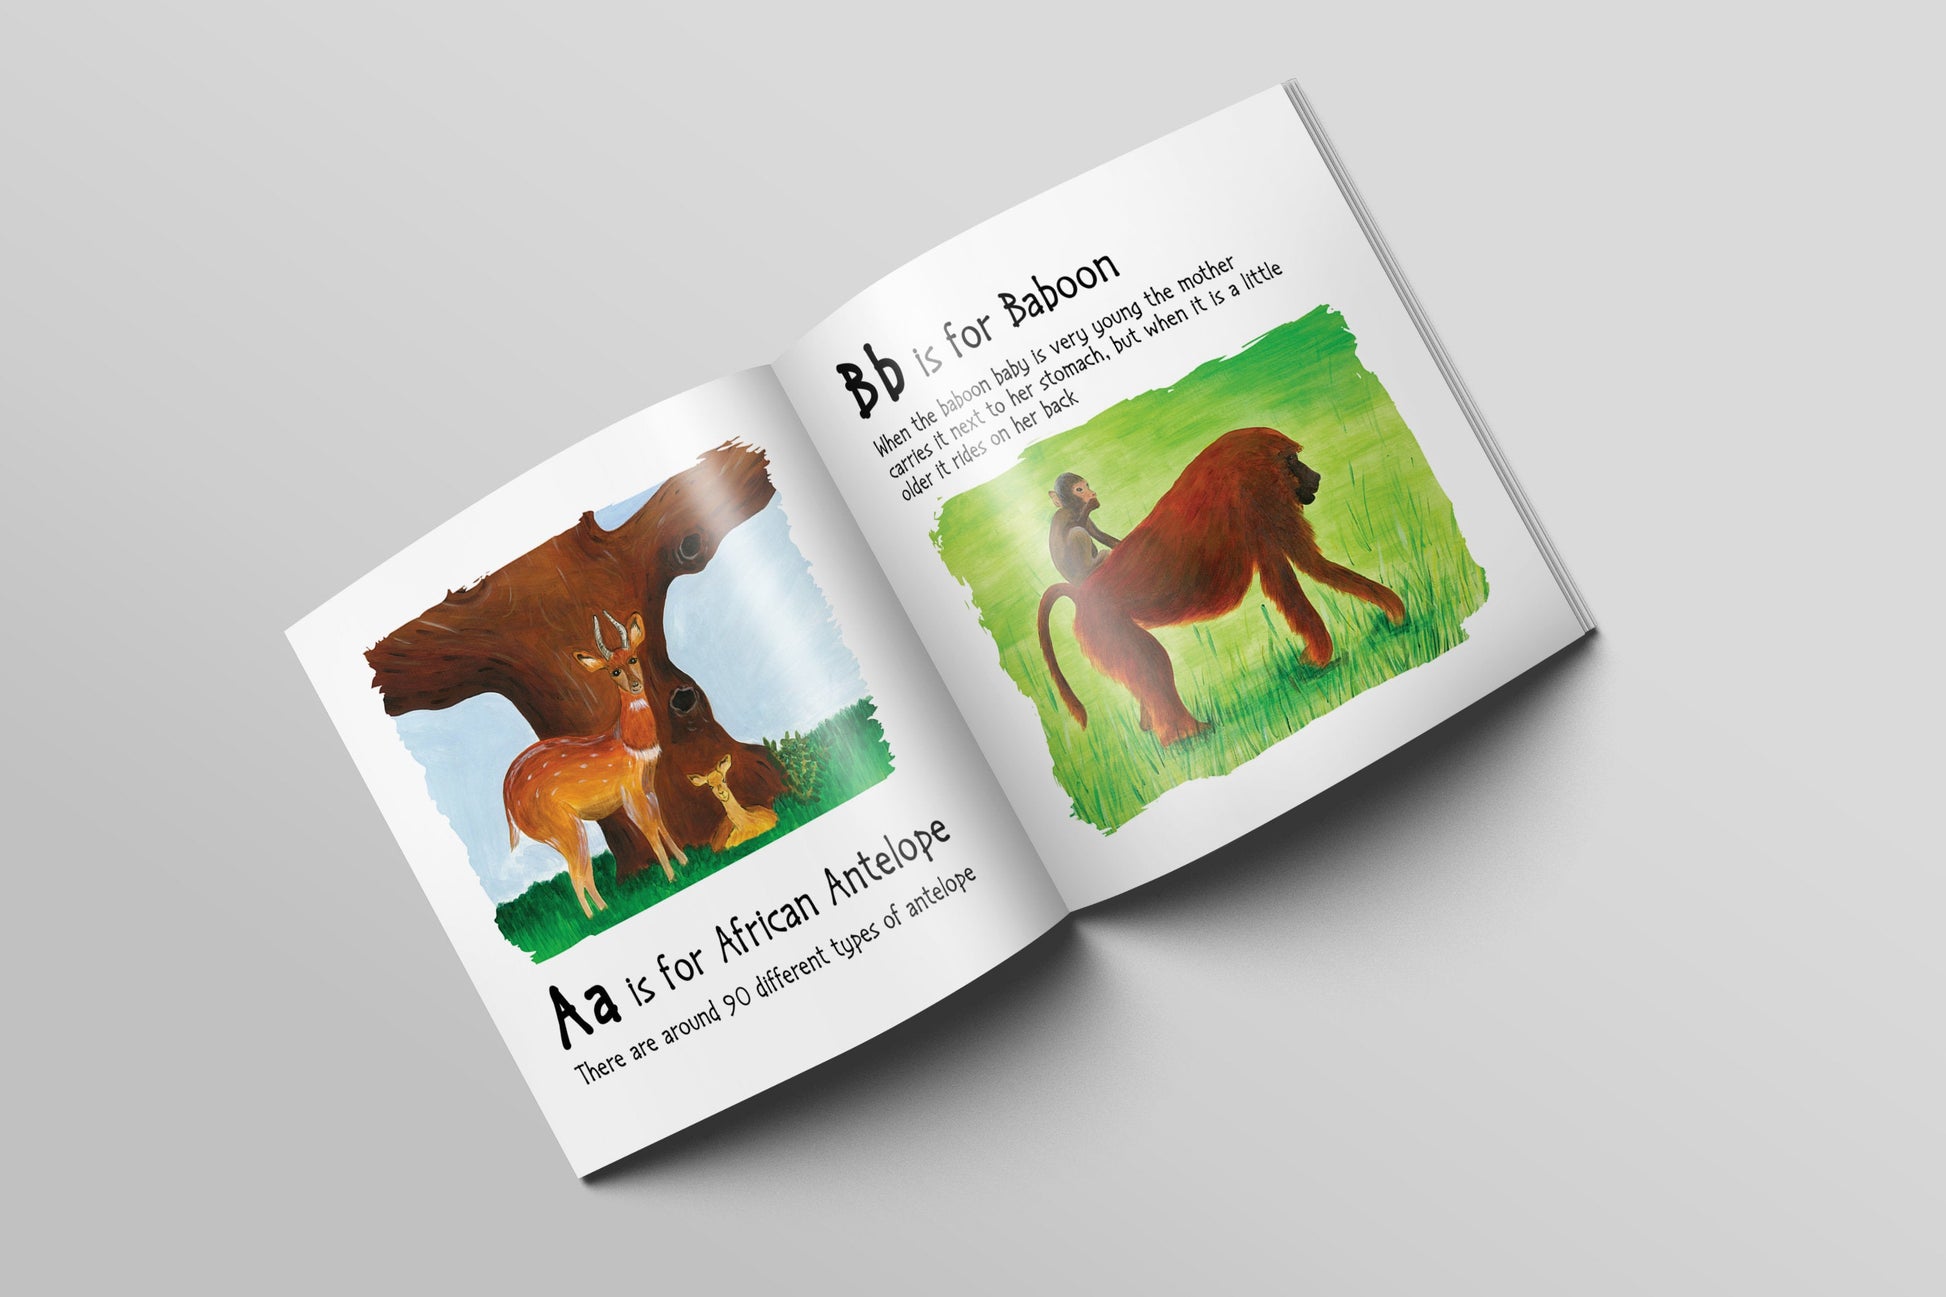 Each picture in the book is accompanied by a fun learning fact